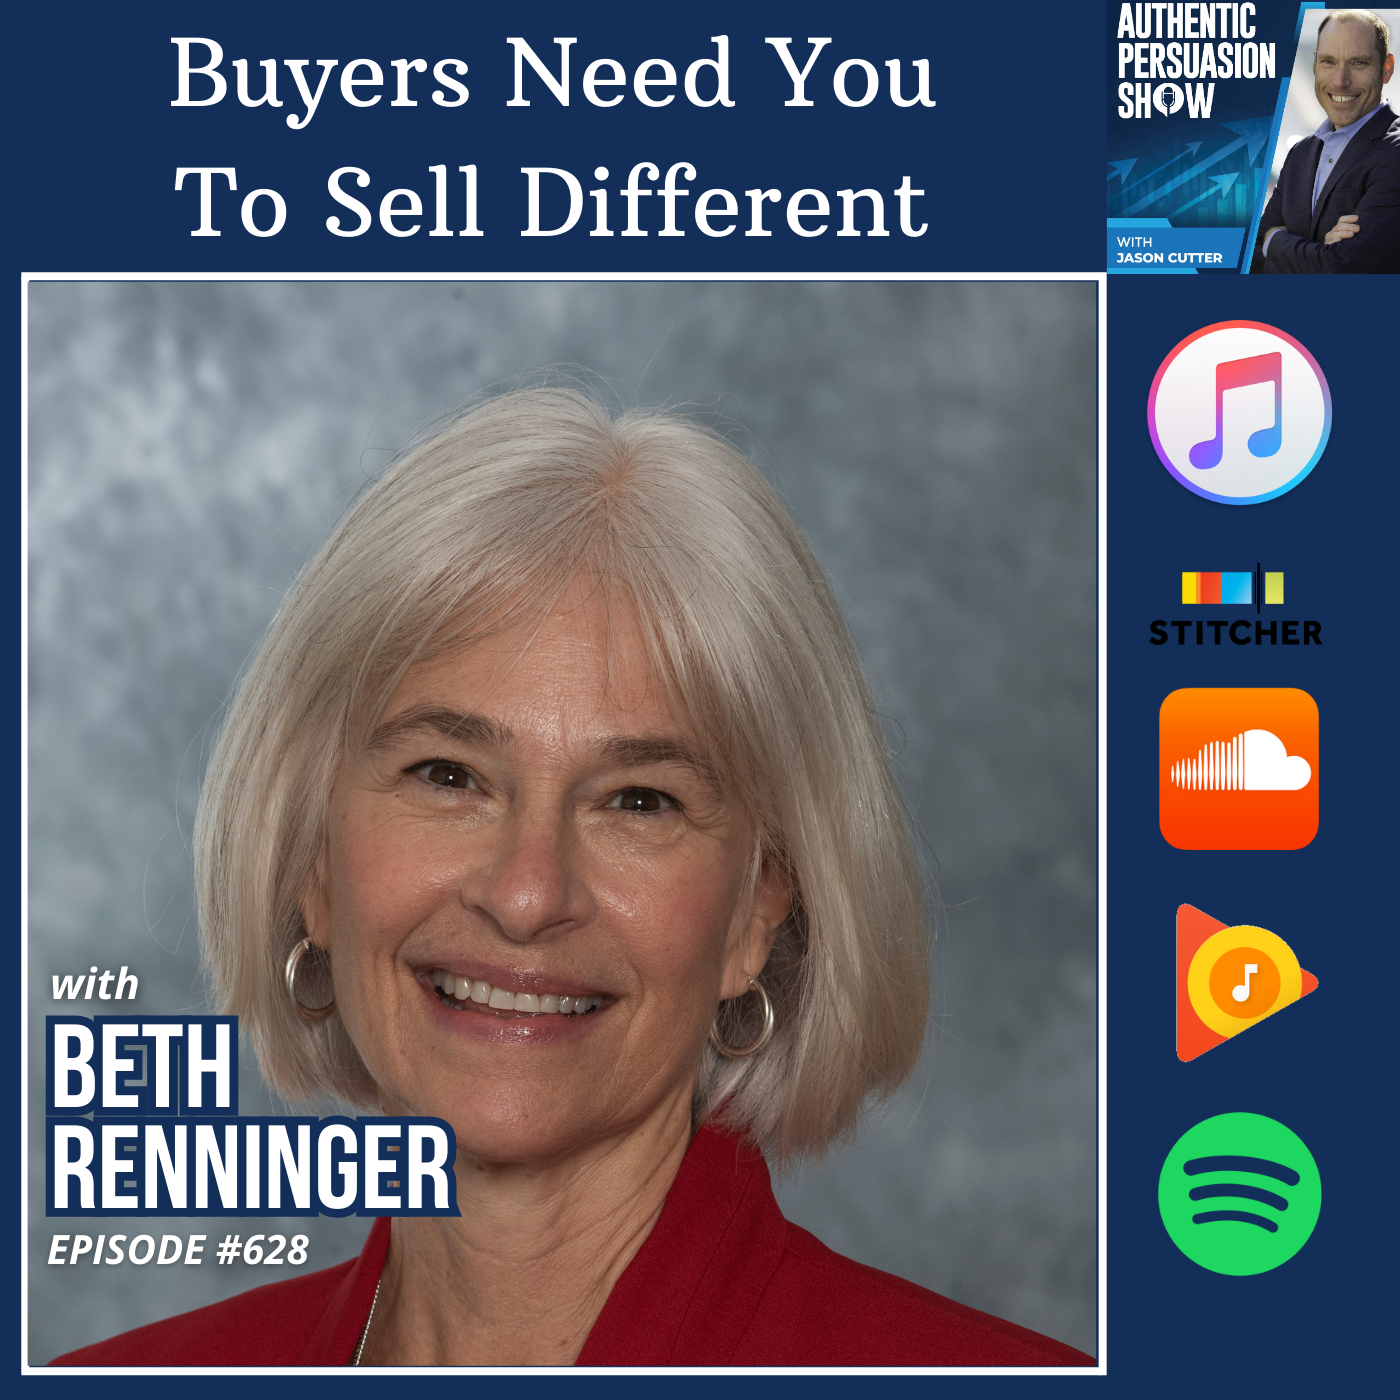 [628] Buyers Need You To Sell Different, with Beth Renninger from University of South Carolina